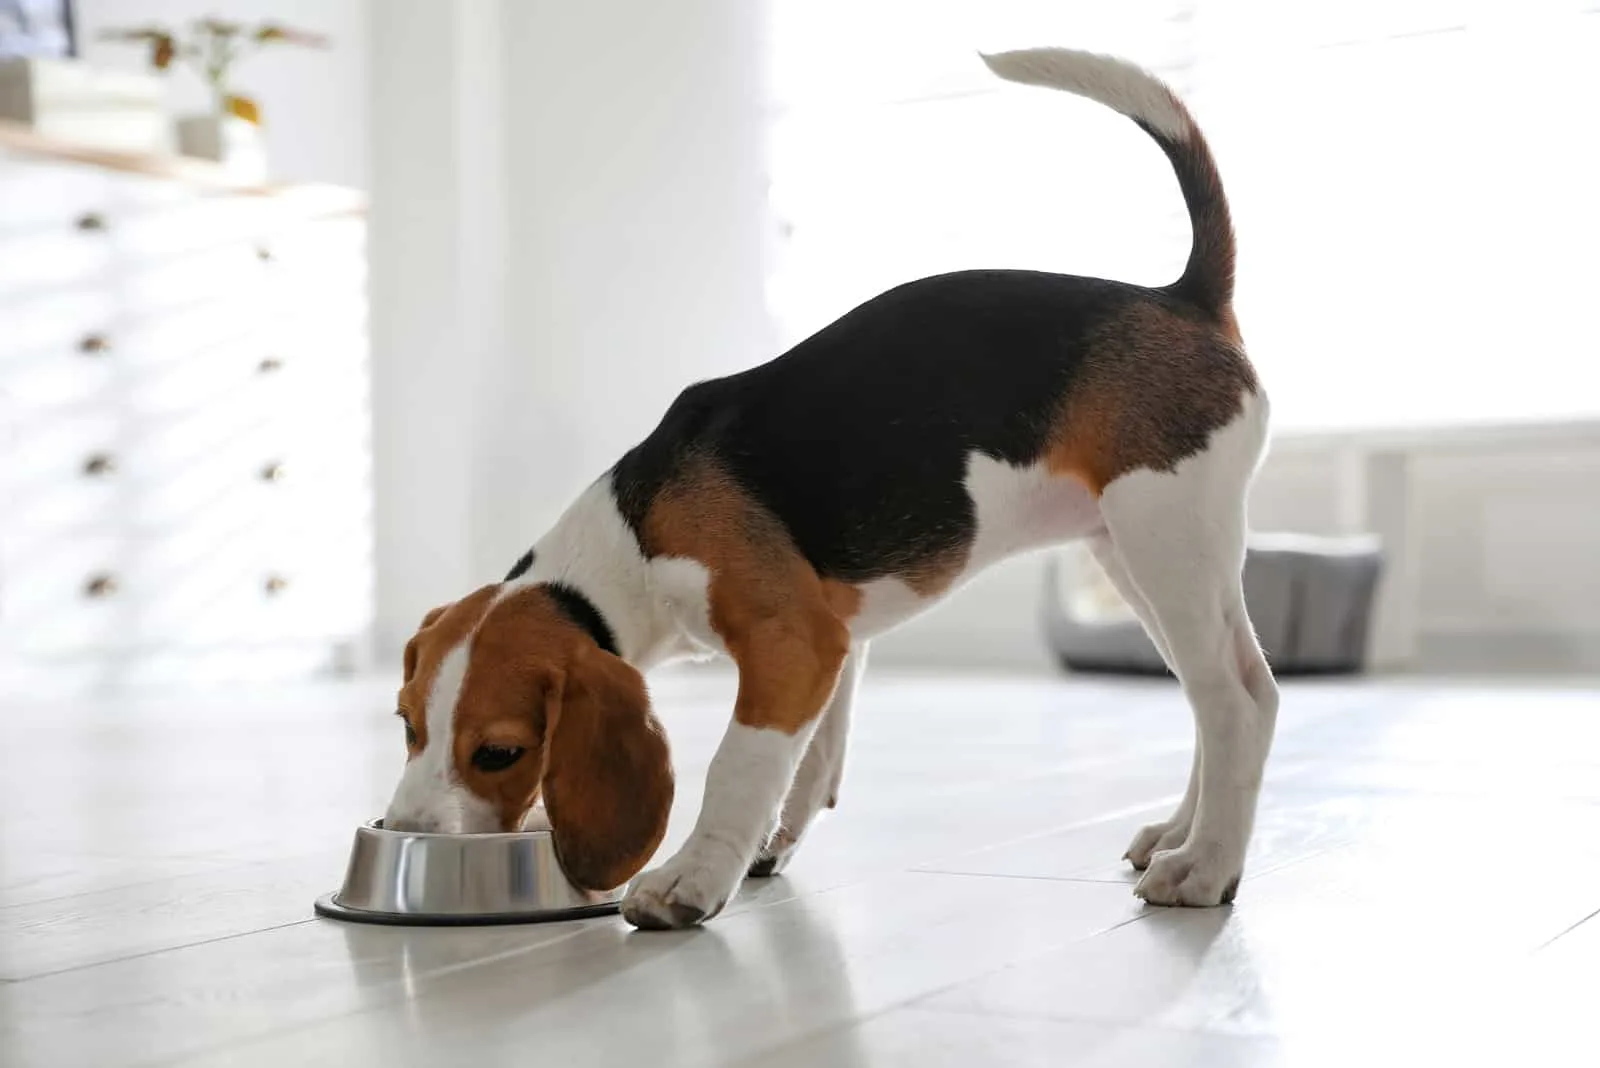 Cute Beagle puppy eating at home